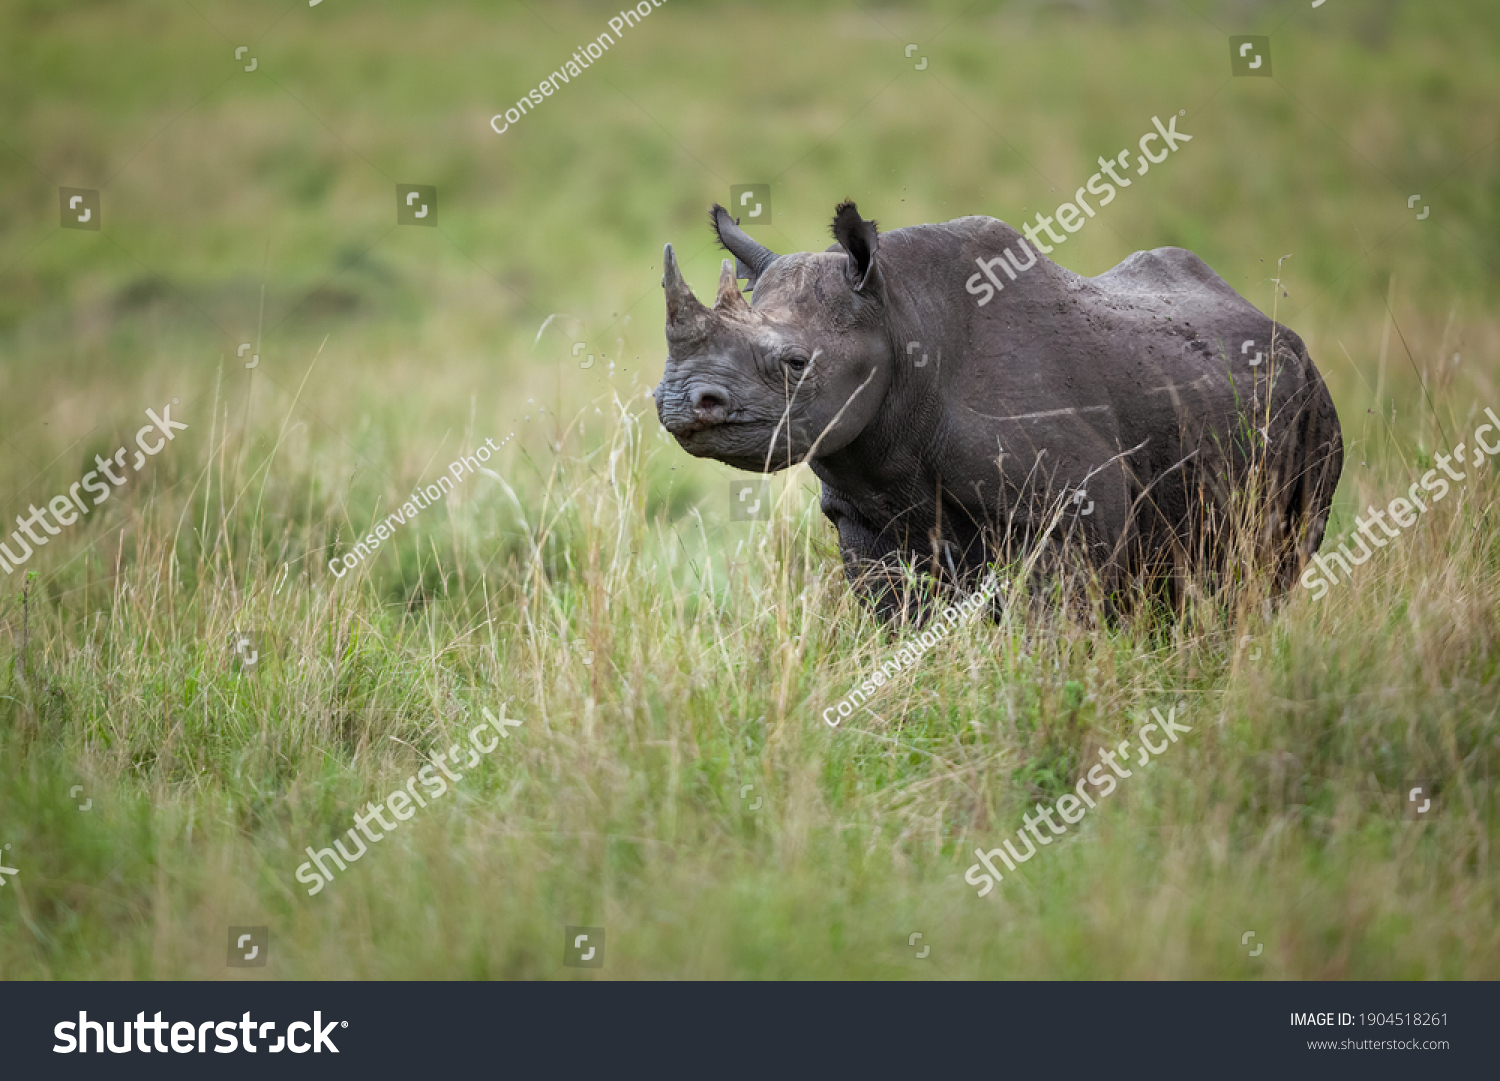 A black rhinoceros (Diceros bicornis) on the open plains of Kenya’s Maasai Mara National Reserve. The black rhinoceros is classified as critically endangered by the IUCN. #1904518261